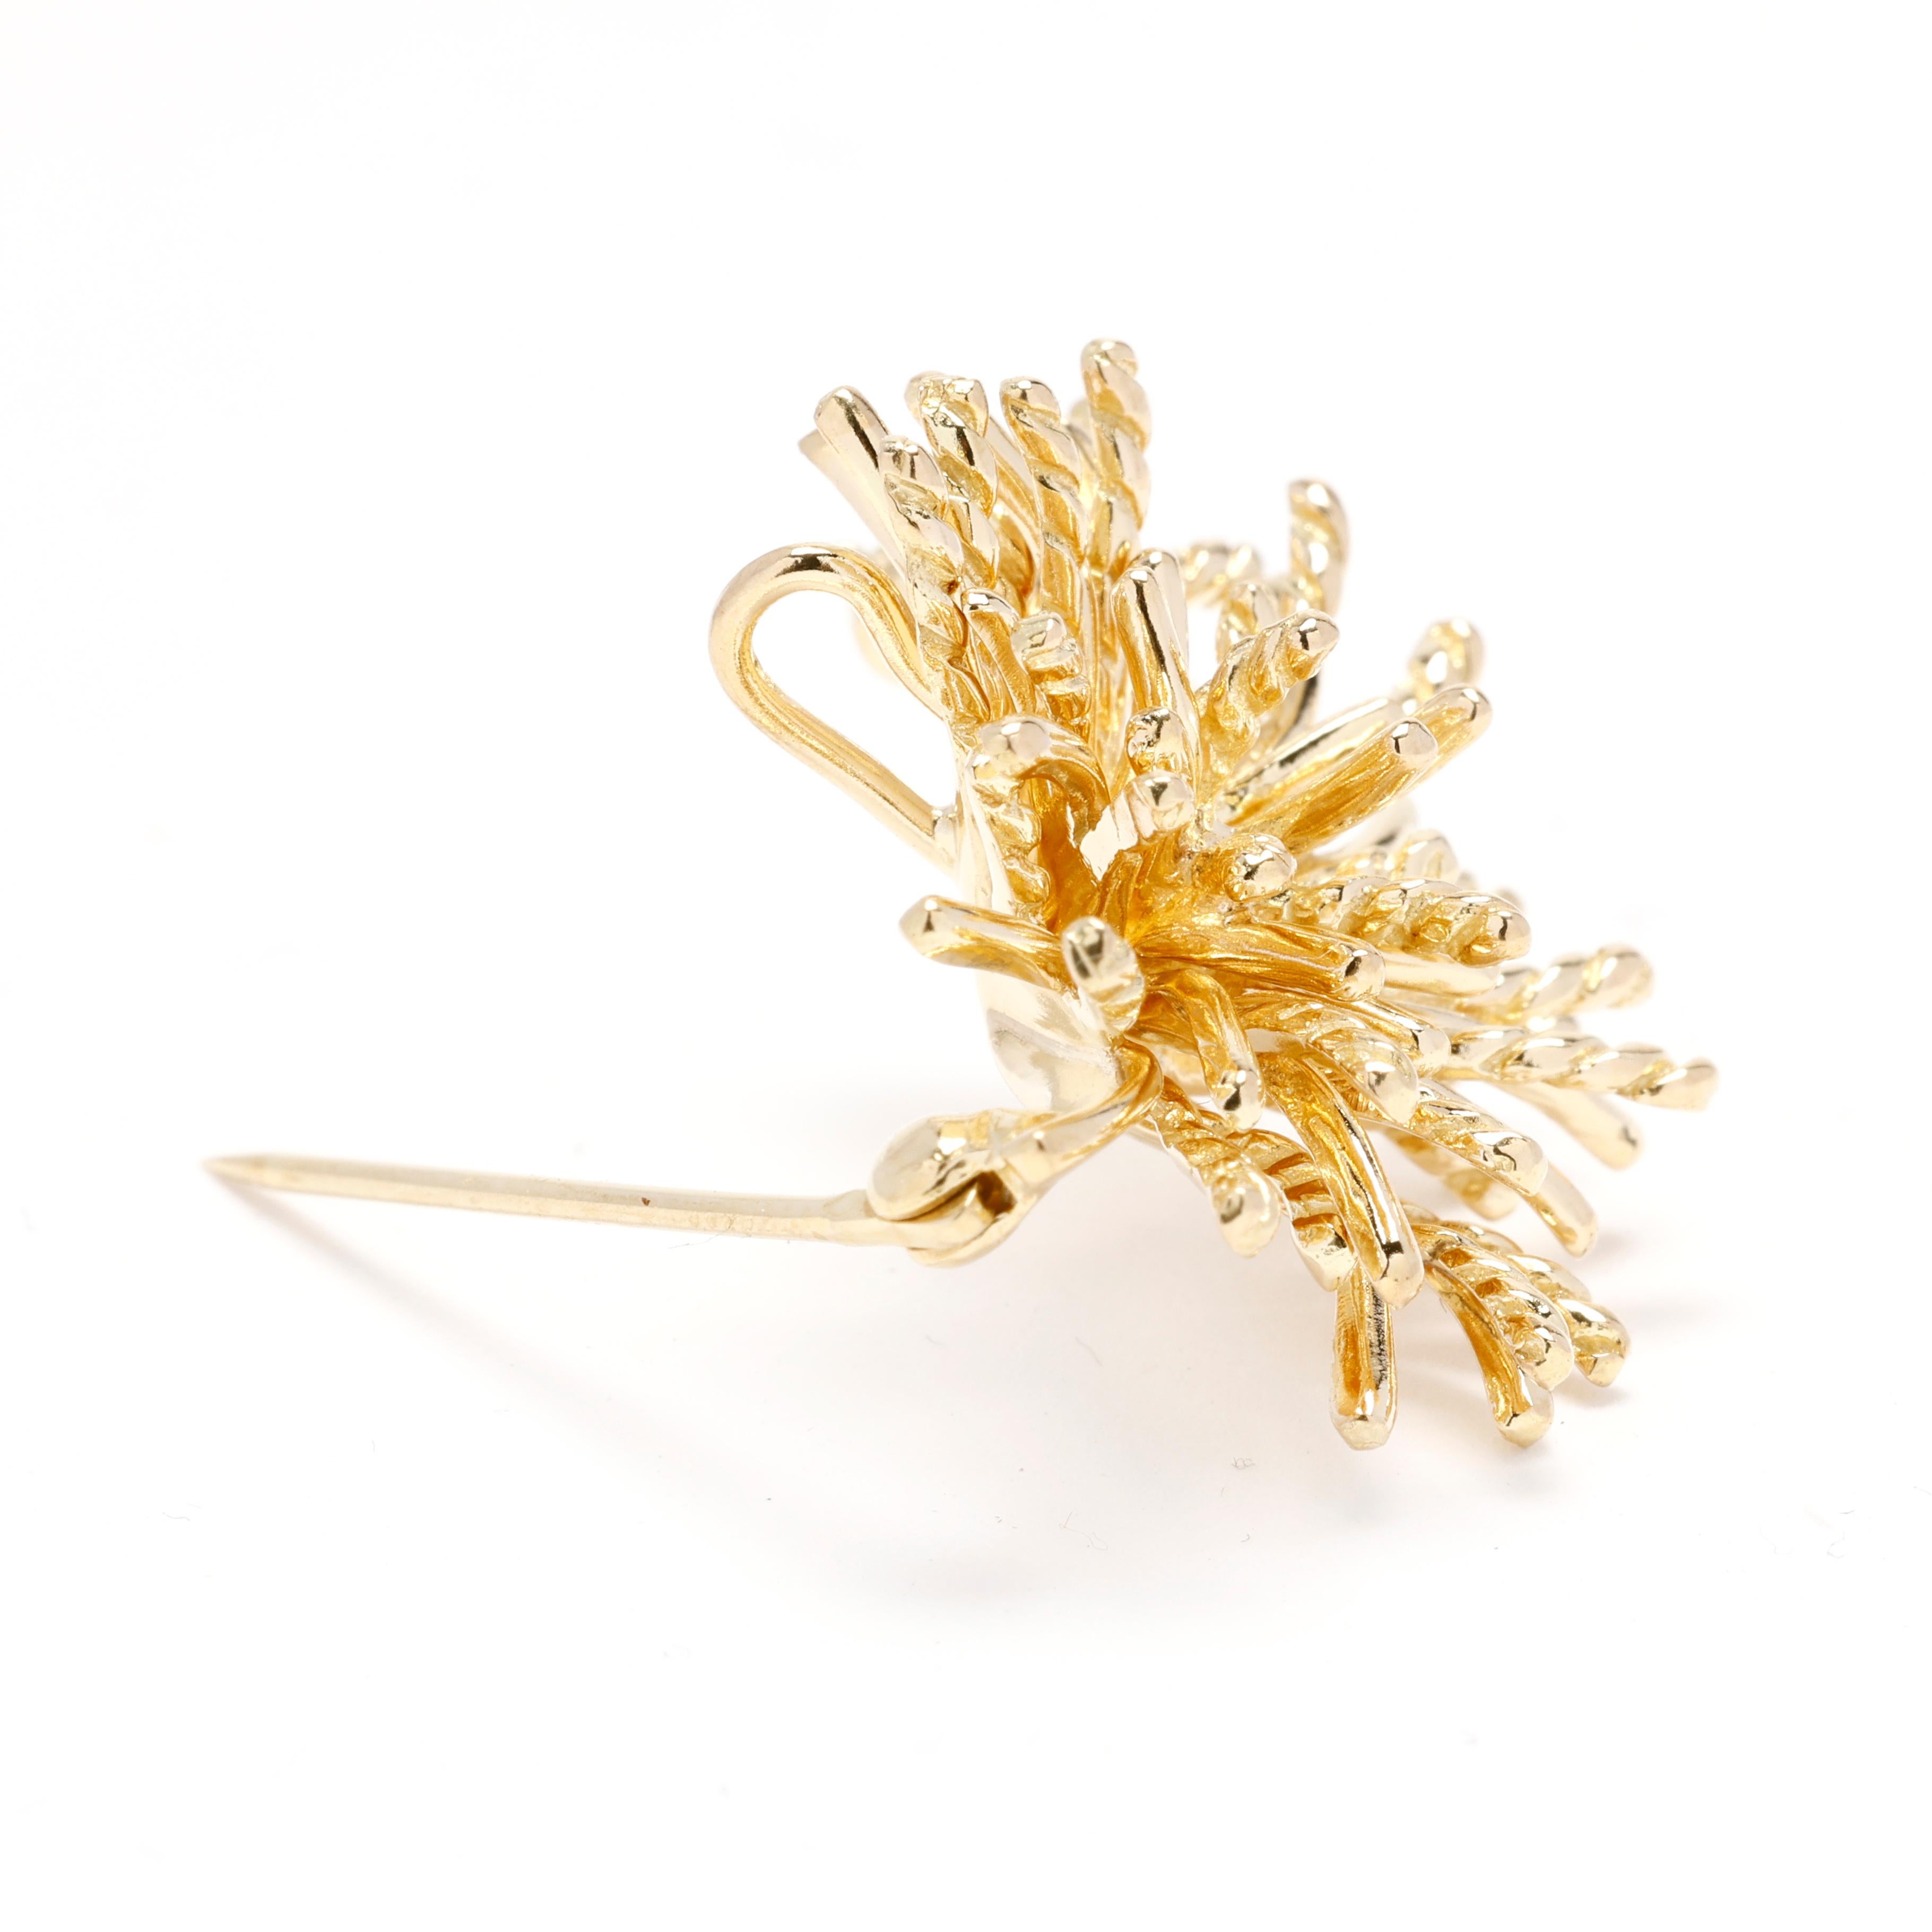 Experience the epitome of luxury with this exquisite Tiffany & Co. Gold Anemone Brooch. Crafted in lustrous 18k yellow gold, this stunning designer piece showcases the intricate beauty of anemone flowers, making it a standout statement accessory